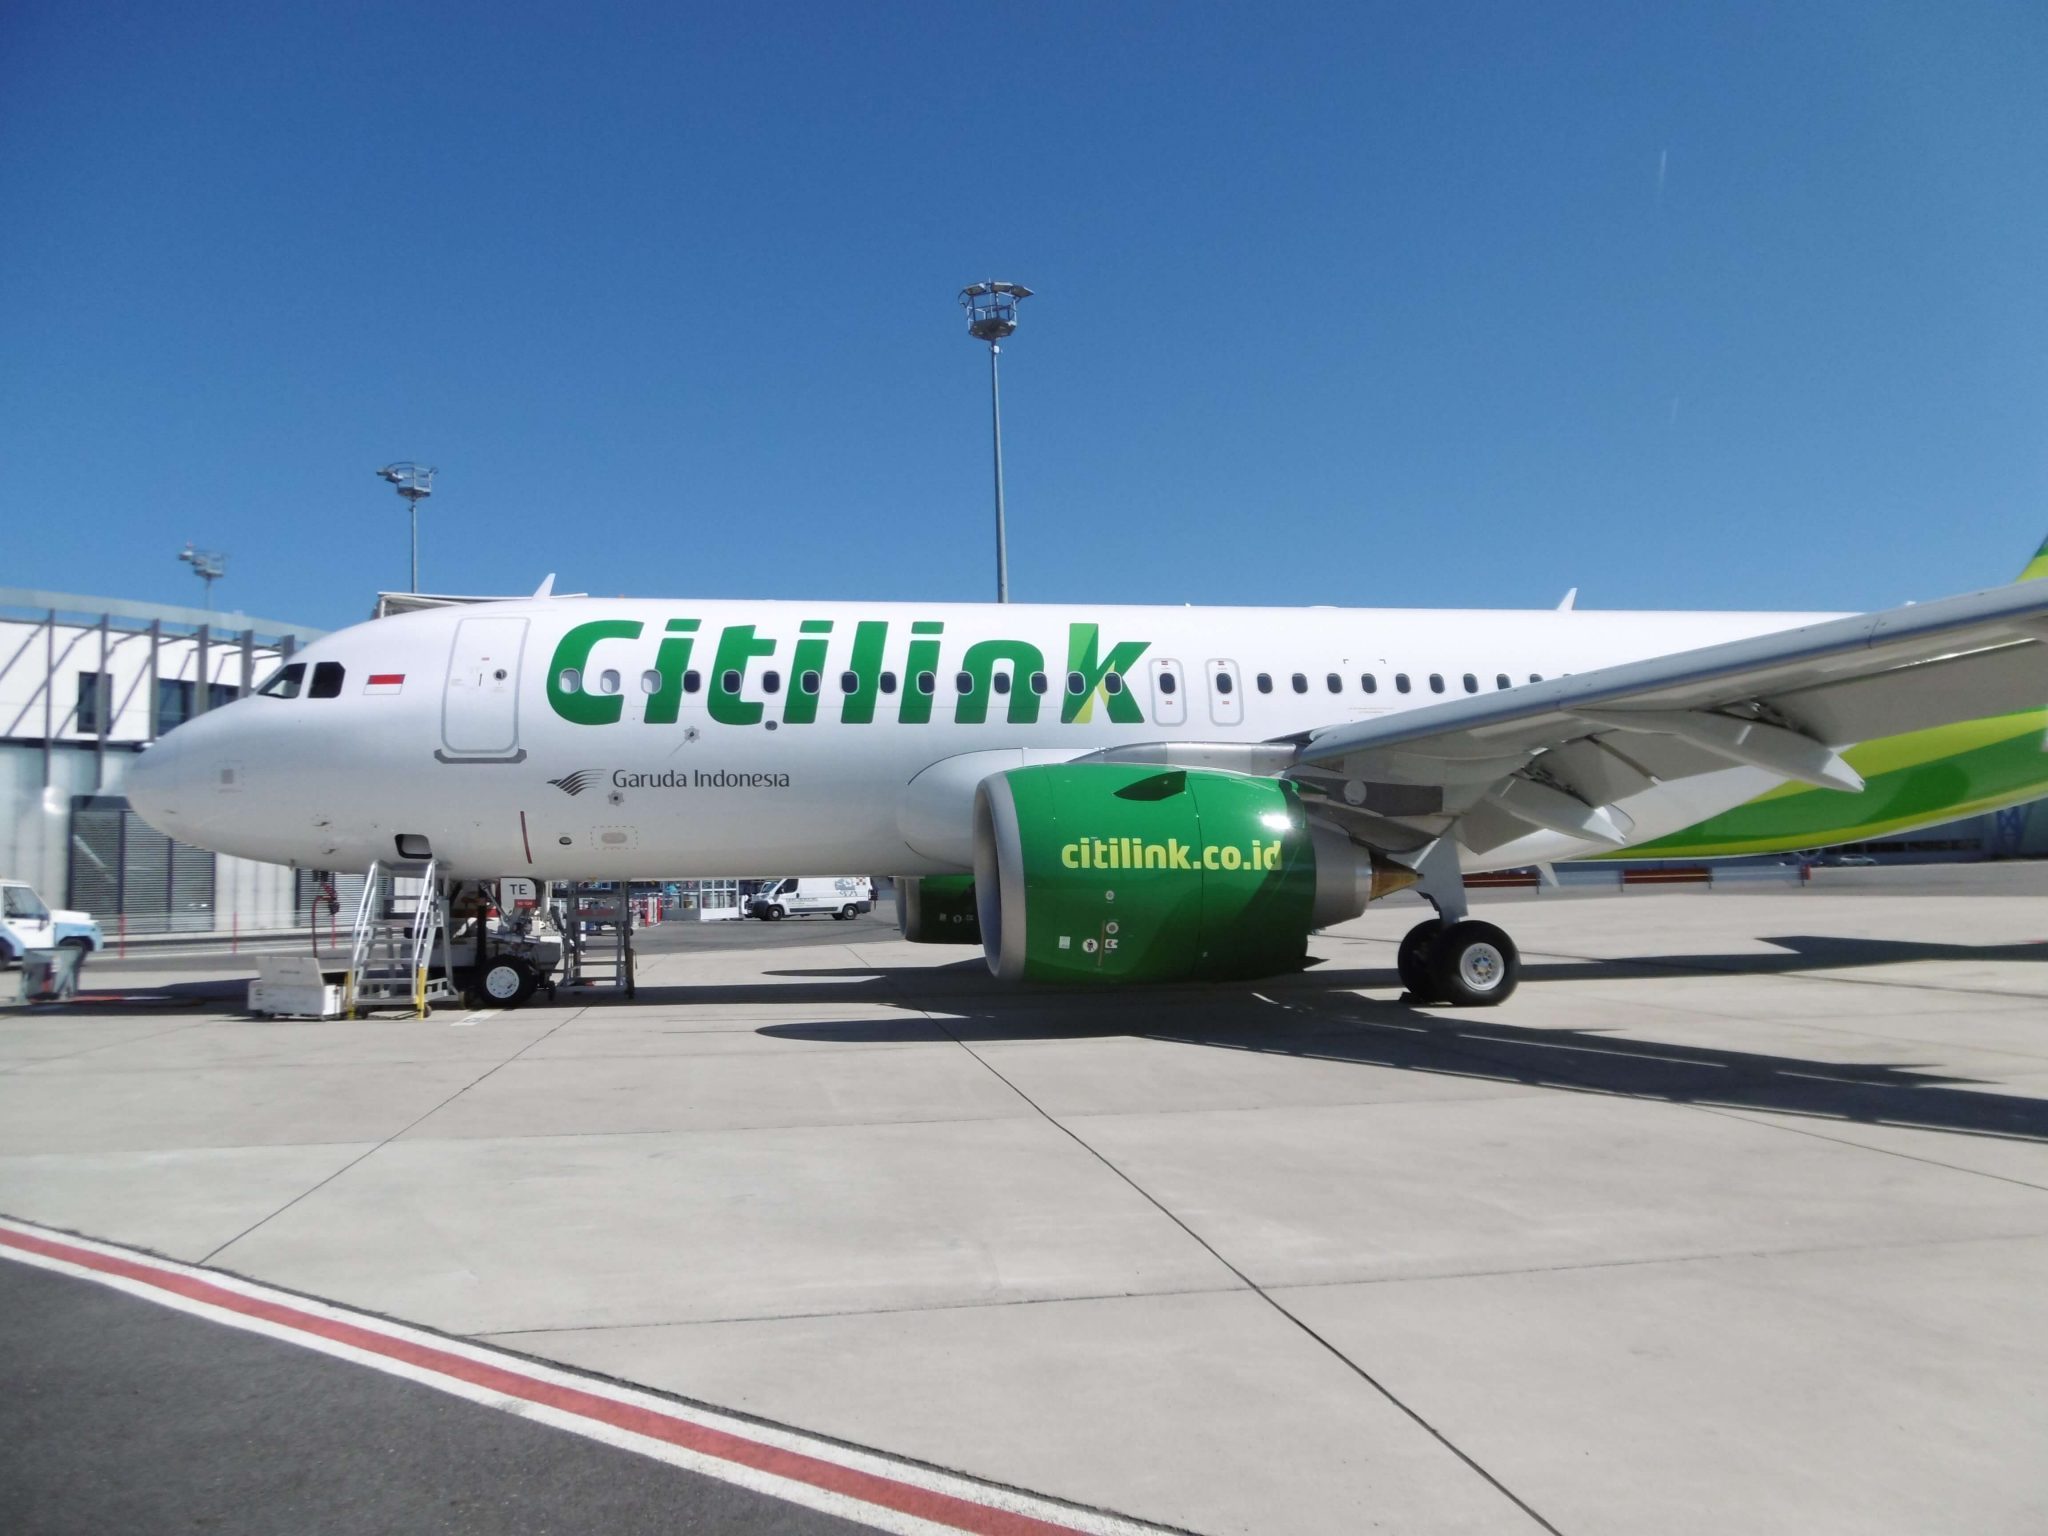 Garuda Indonesia’s Citilink to open new international routes to Frankfurt and Jeddah